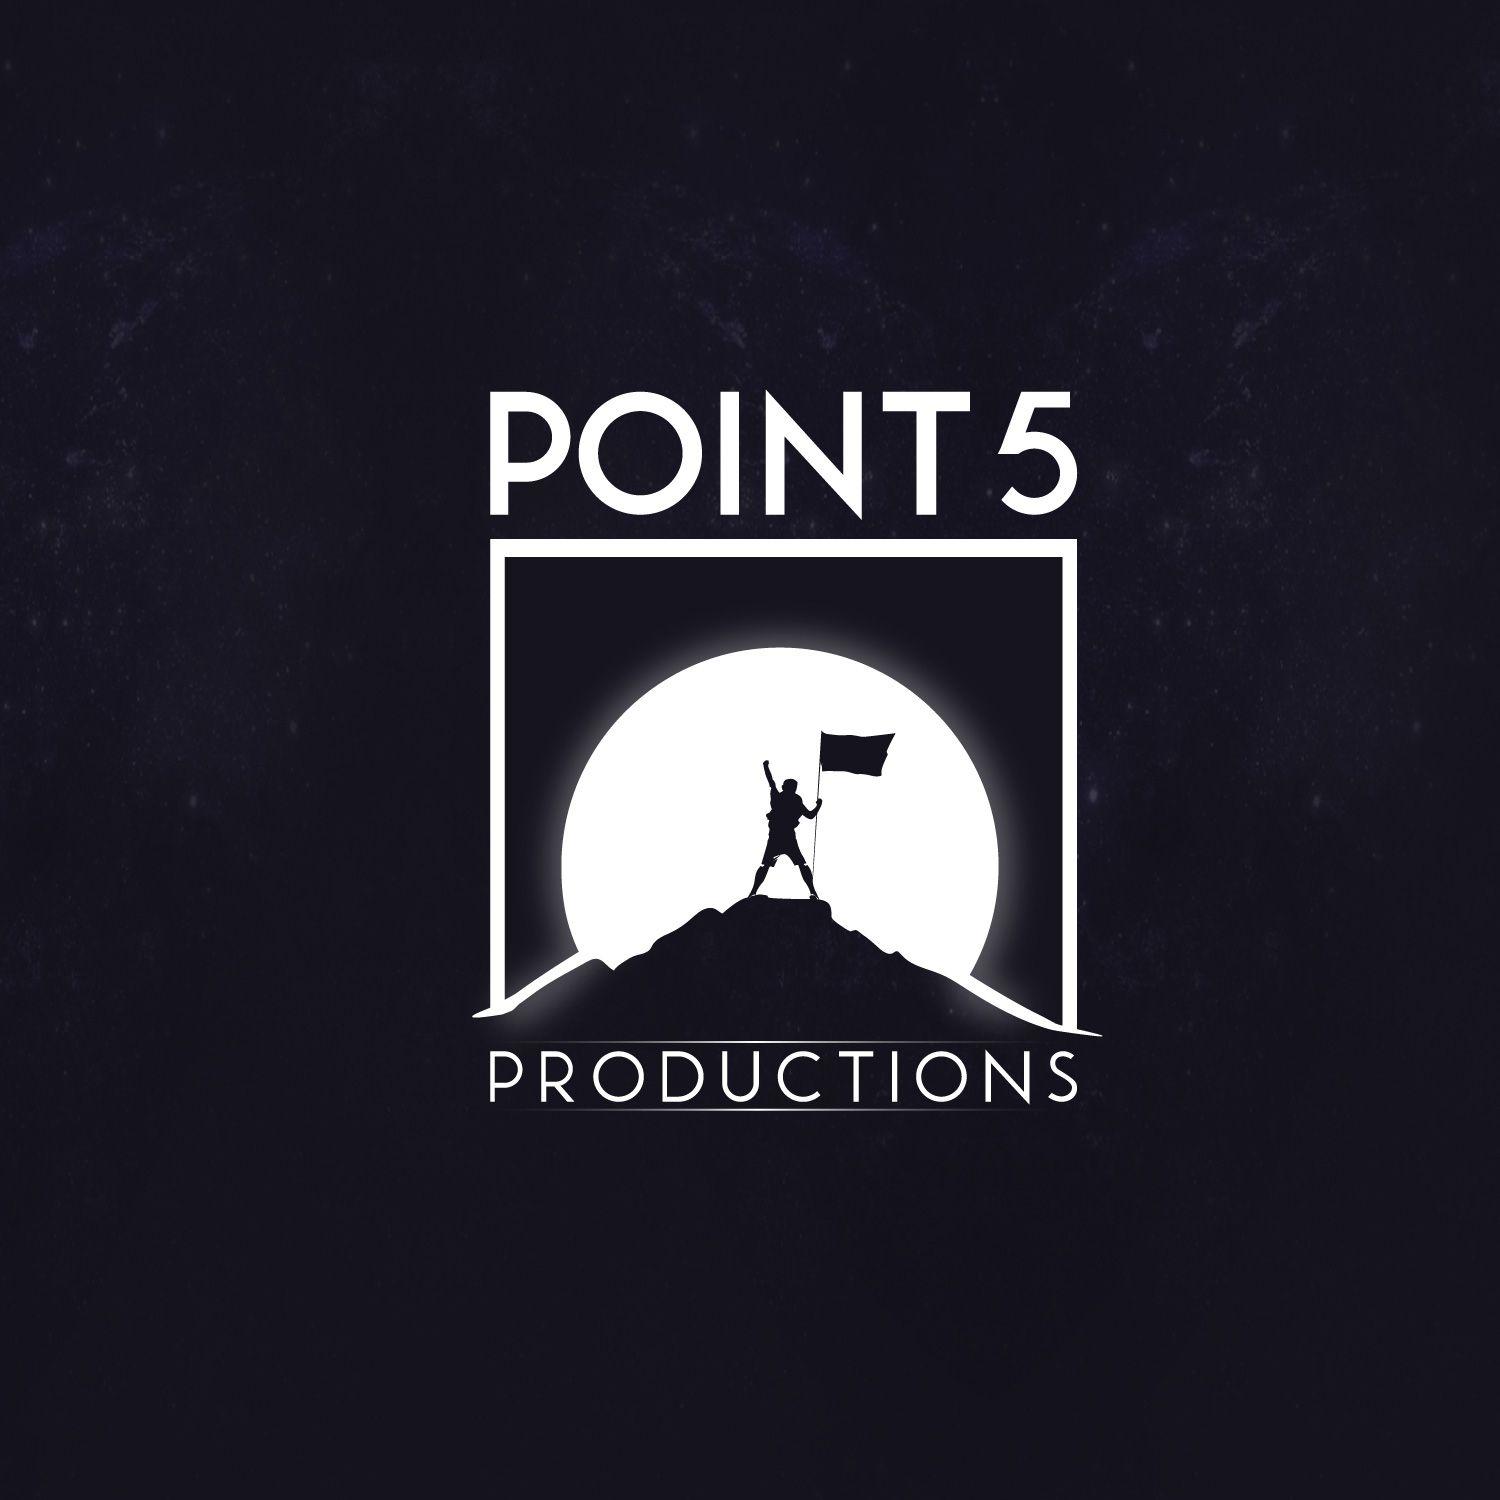 Film Production Logo - Conservative, Serious, Film Production Logo Design for Point 5 ...